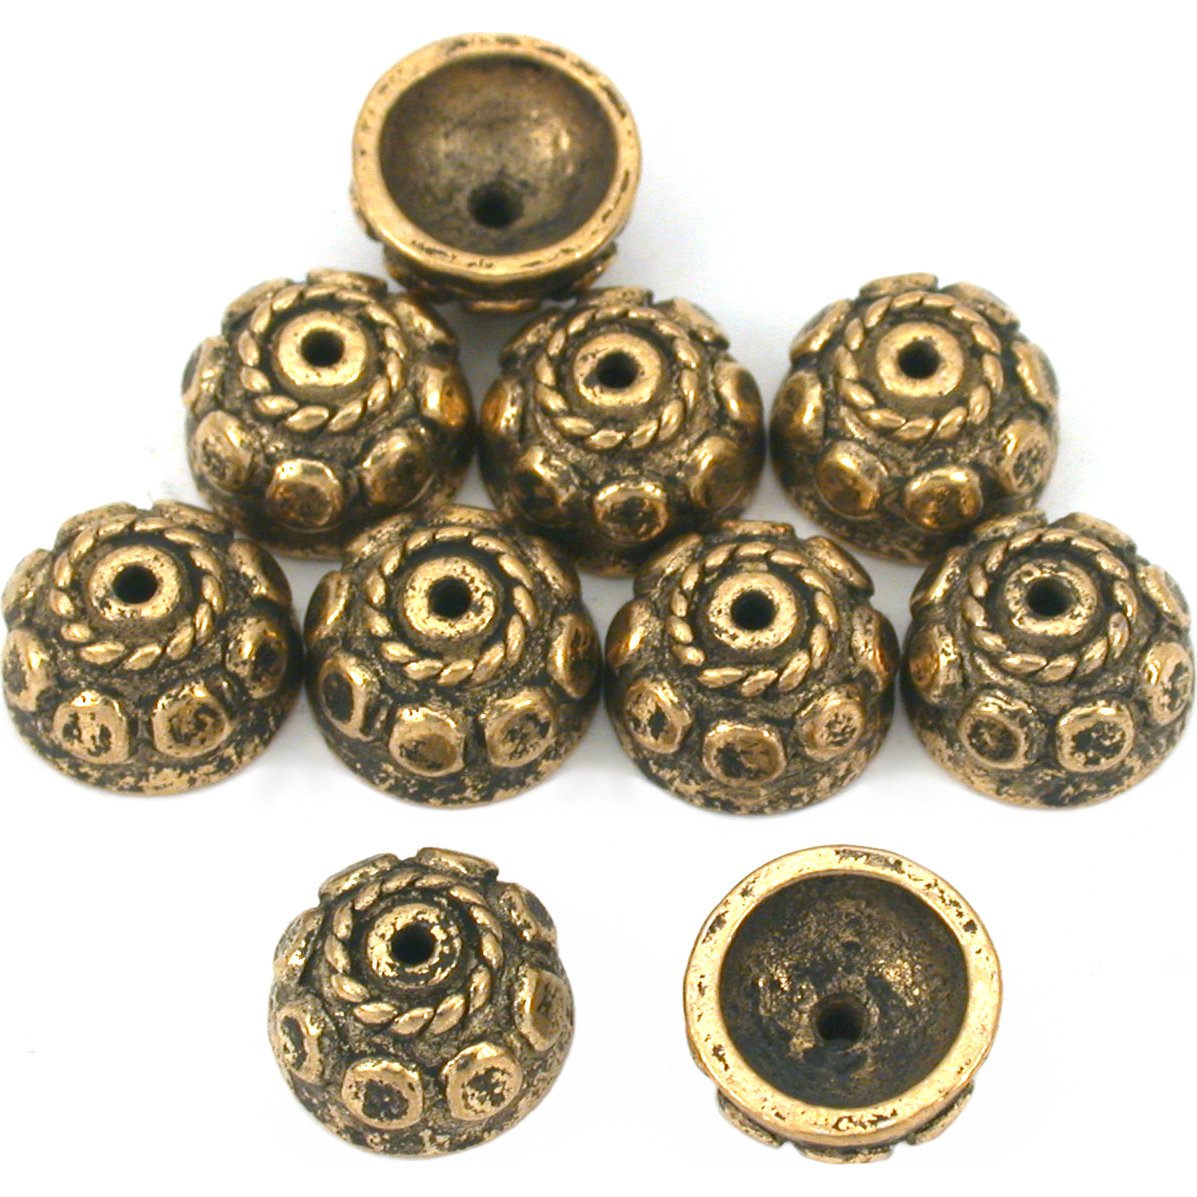 Bali Bead Caps Antique Gold Plated 9.5mm 10Pcs Approx.